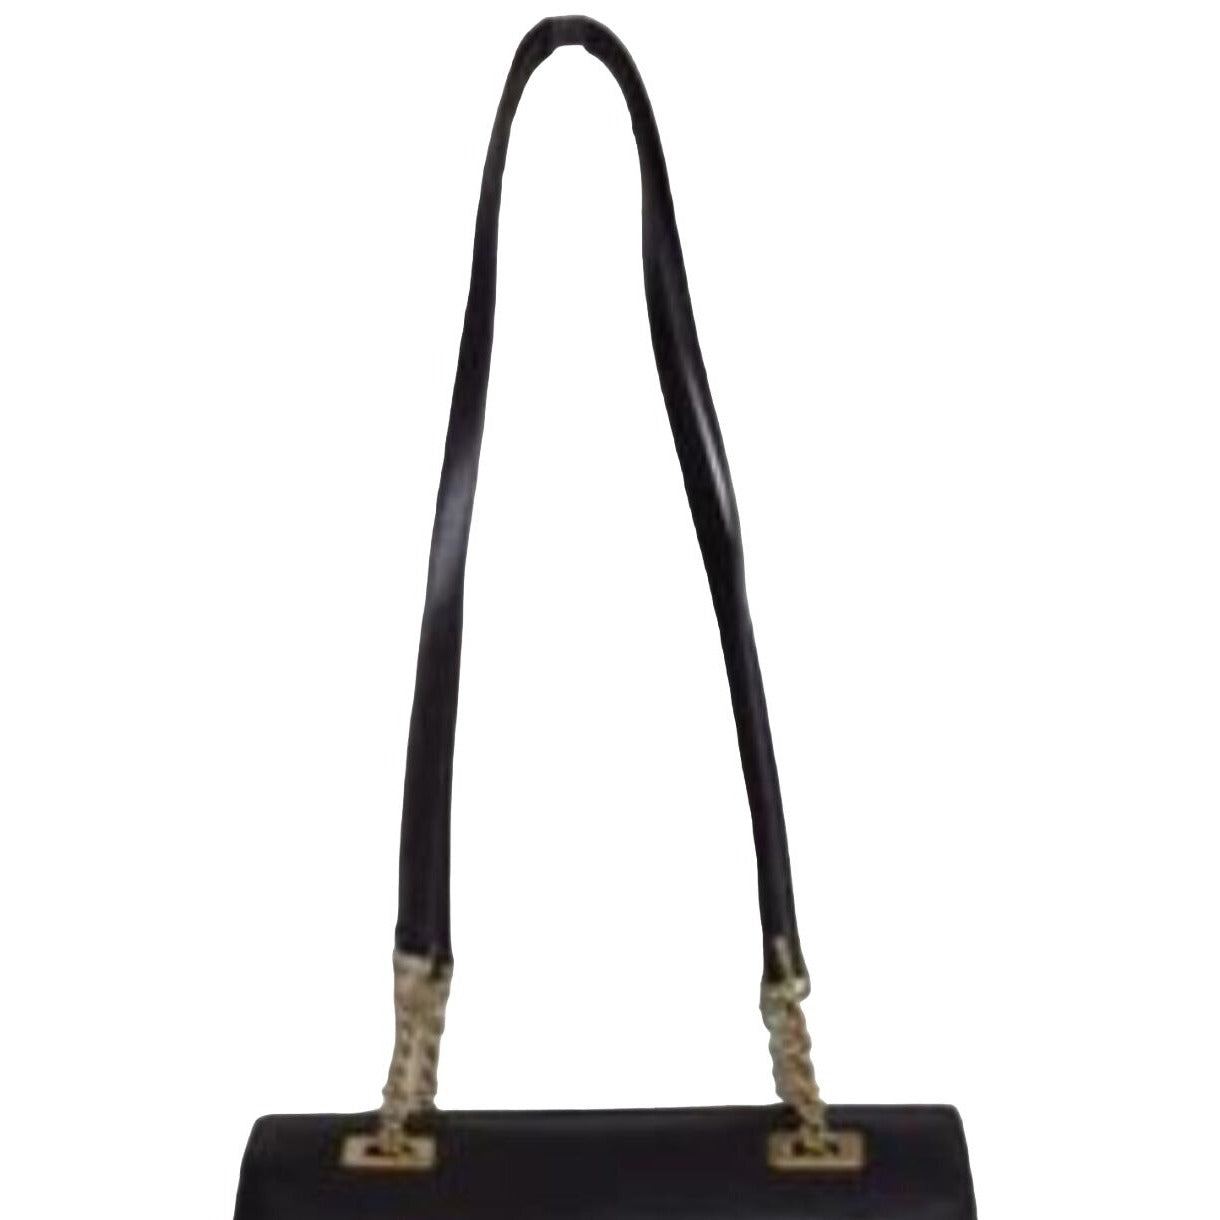 Gucci, unique, brown leather, large satchel style  shoulder bag with a snap hinged top, two longer gold chain & leather shoulder straps